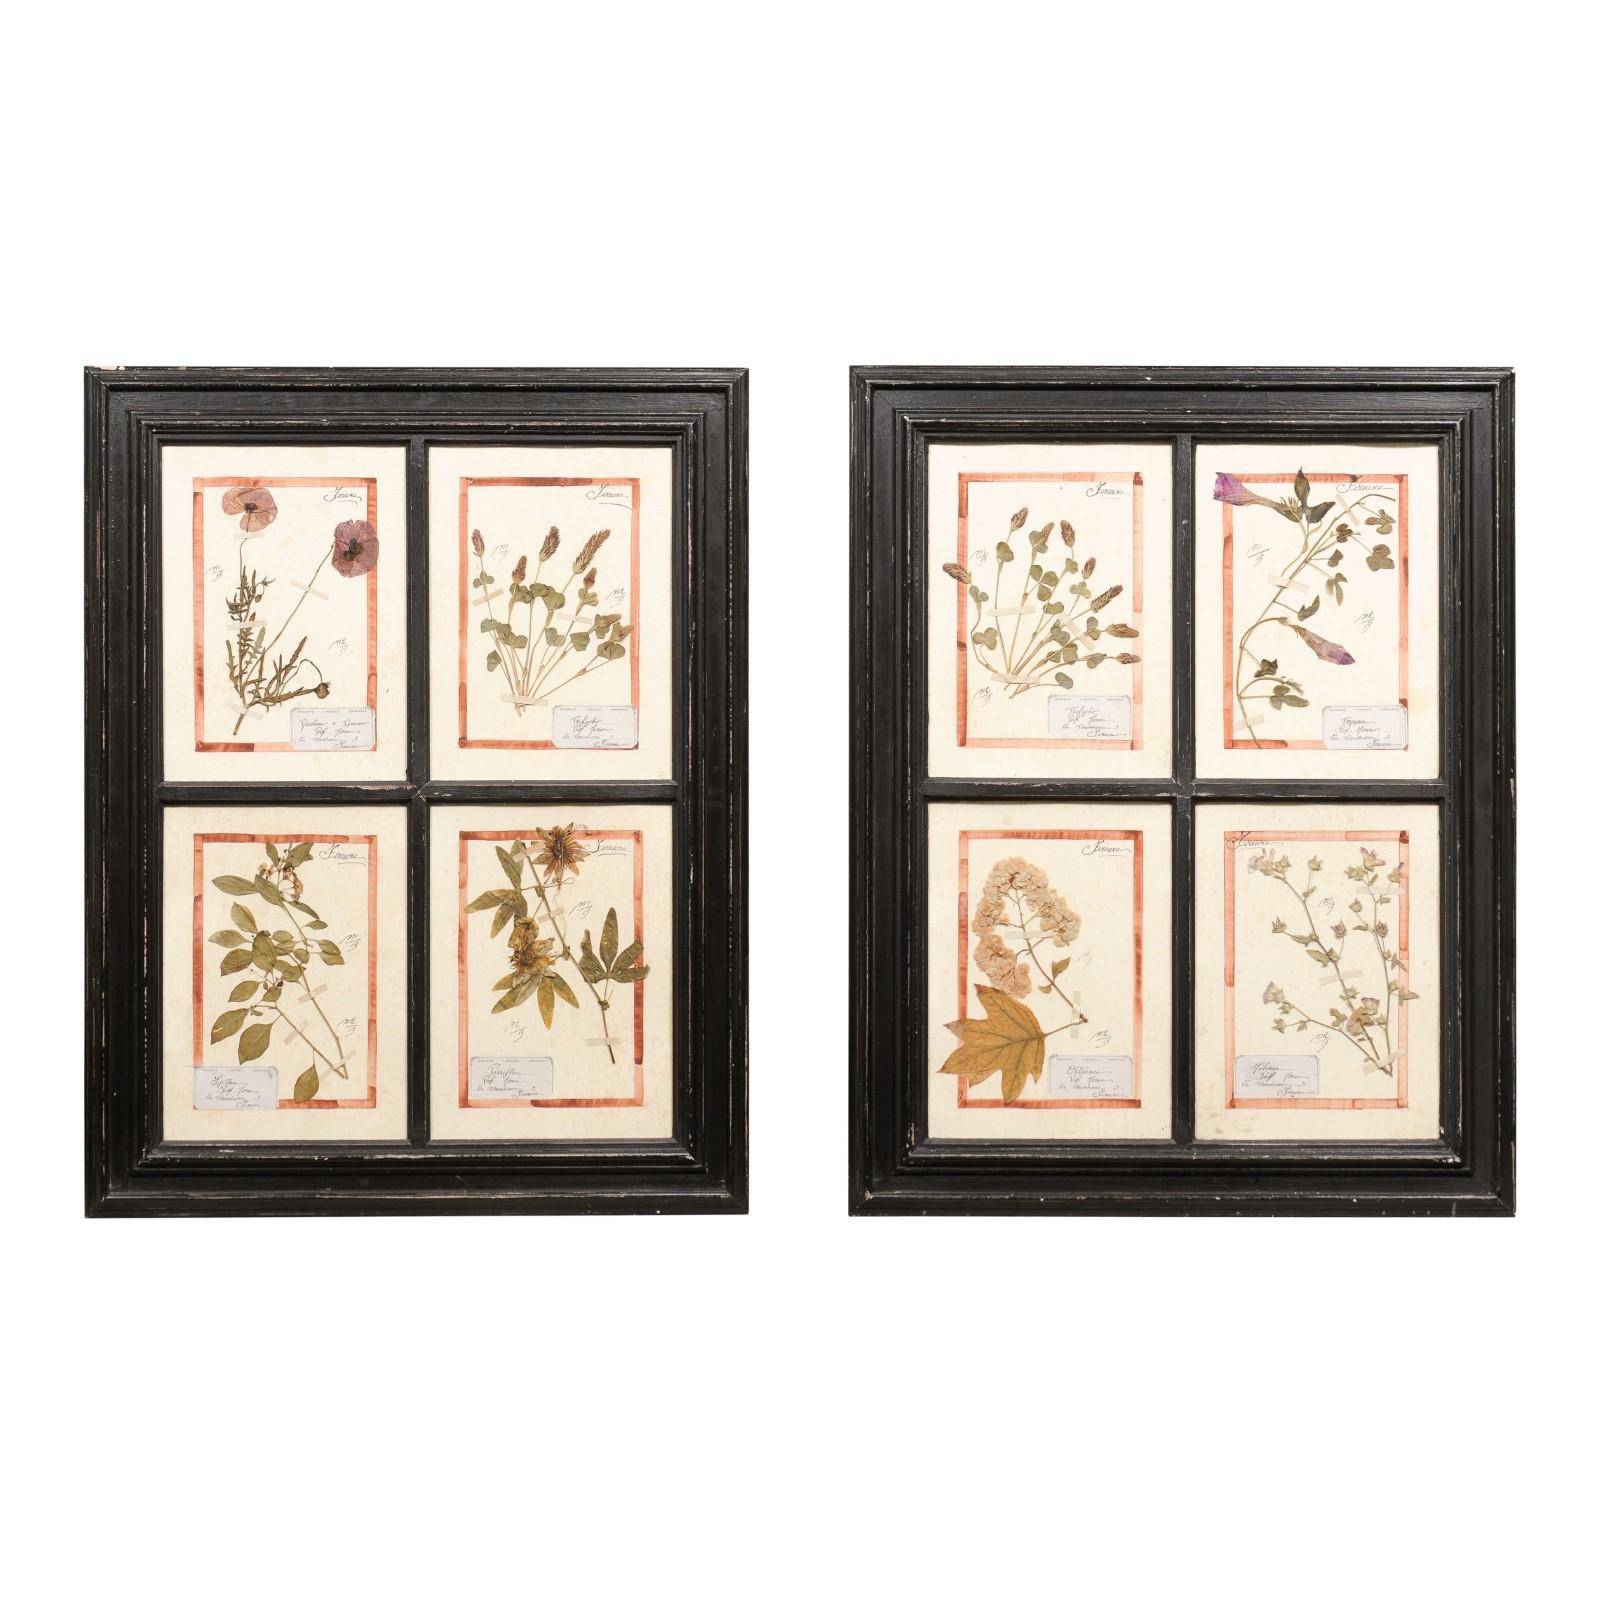 Florentine quadruple botanicals in black frame under glass. We have two frames available, priced and sold each. Imbue your living space with the subtle elegance and rustic charm of these Florentine quadruple botanicals, meticulously framed under